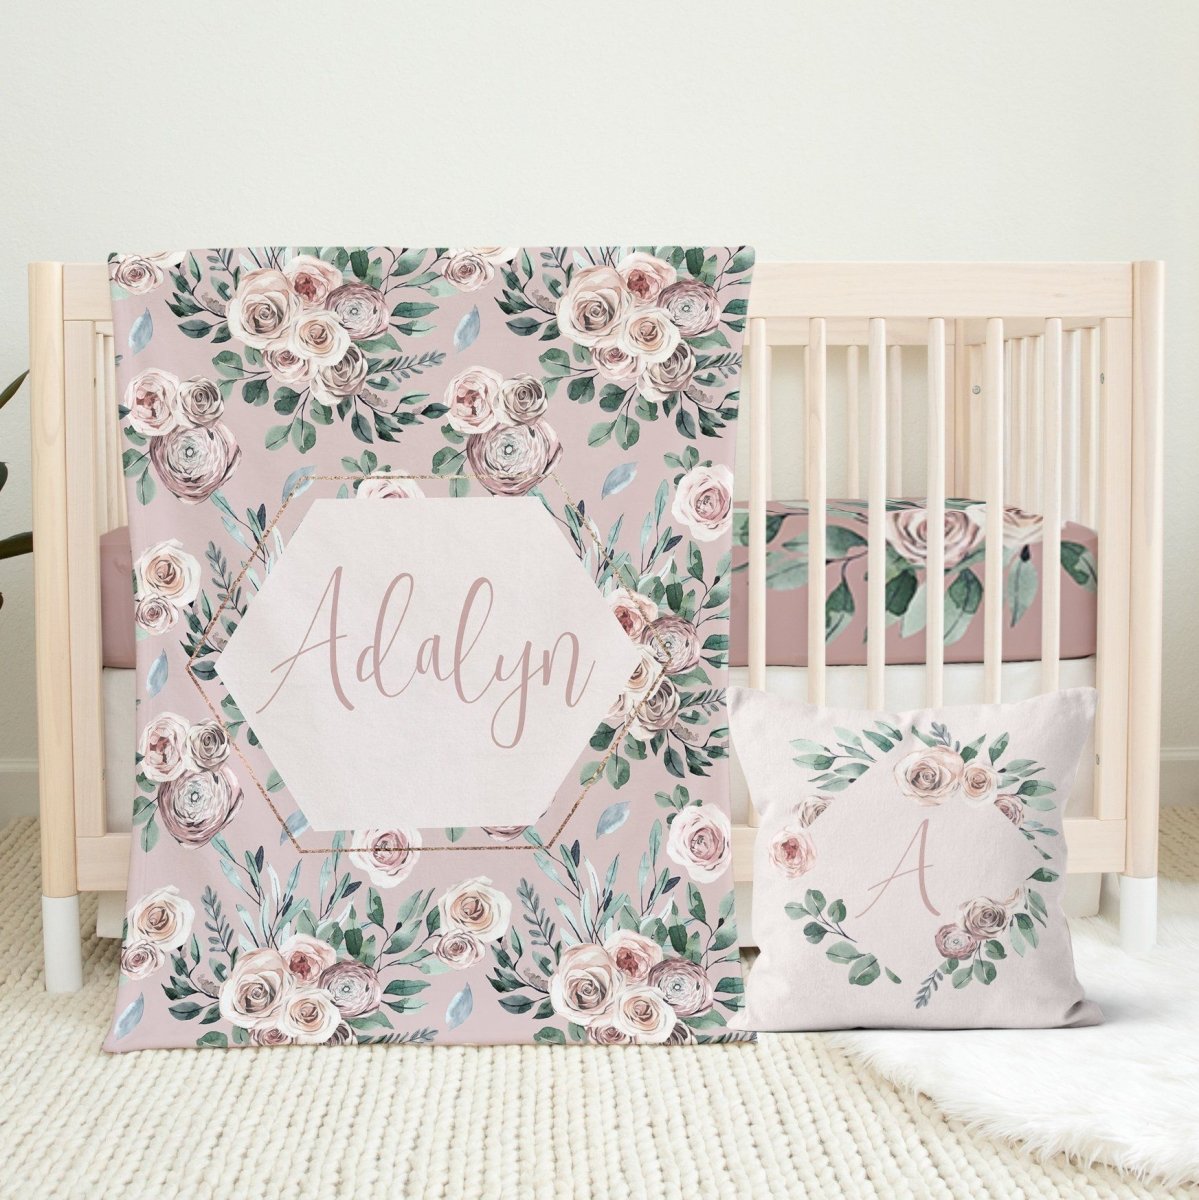 Boho Rose Personalized Crib Sheet - gender_girl, Personalized_Yes, text